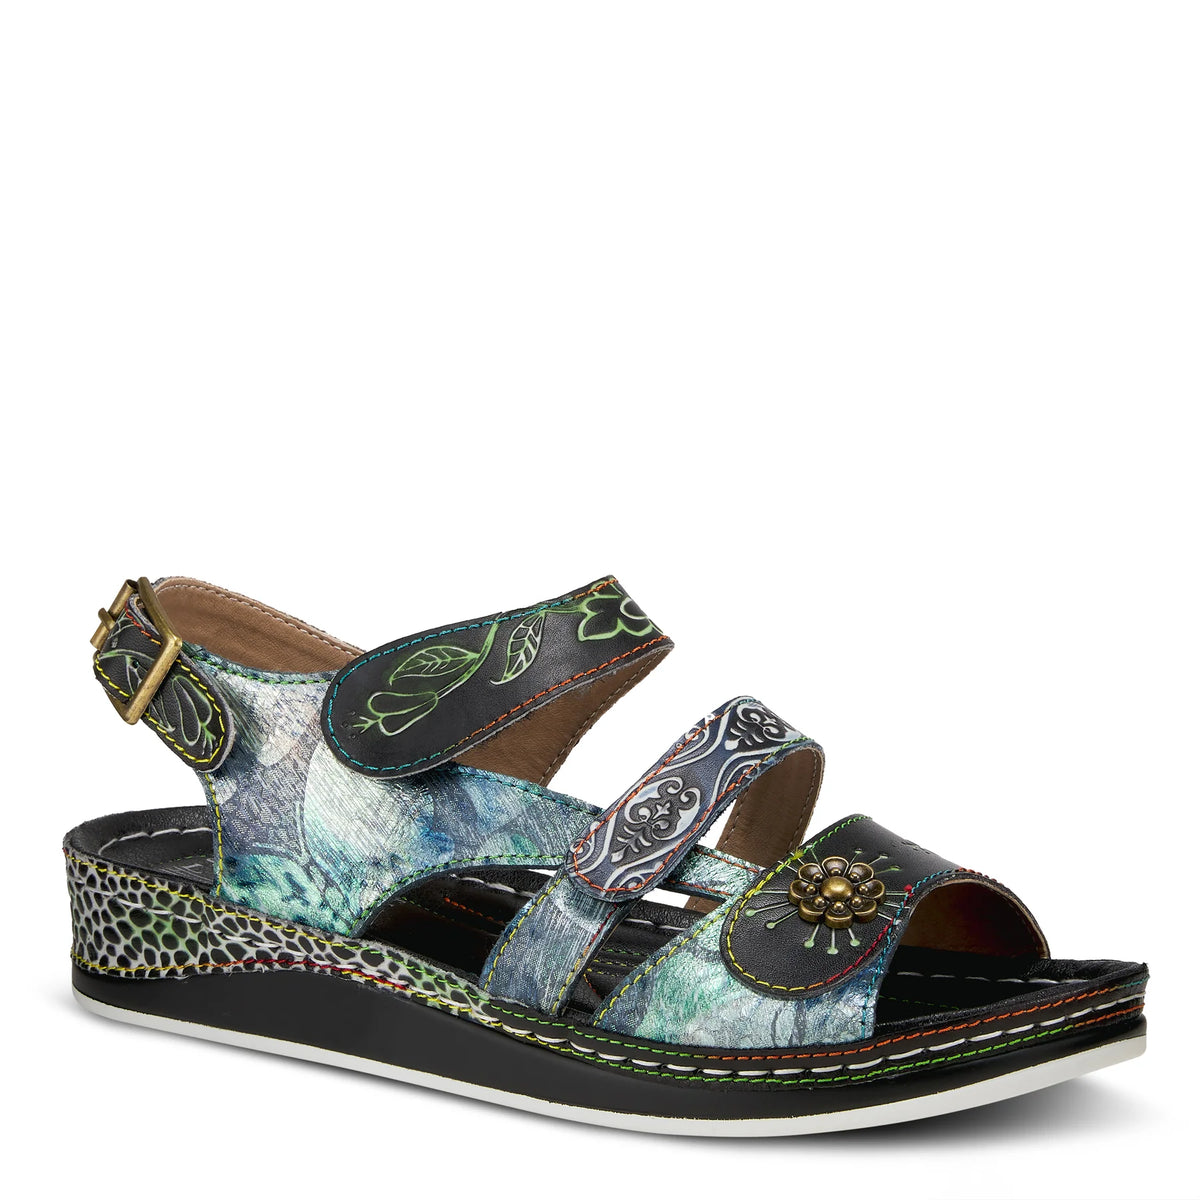 L'Artiste Style: Sumacah Ankle Strap Leather Sandal Shoe SpringStep Shoes Womens Footwear Hand painted, French inspired. unique color blocked floral pattern metal flower button signature rainbow stitching Hook and Loop Velcro straps antiqued gold hardware, floral embossed design, leather pieced wedge. -Hook-and-loop adjustable straps and an adjustable buckled strap at the heel.